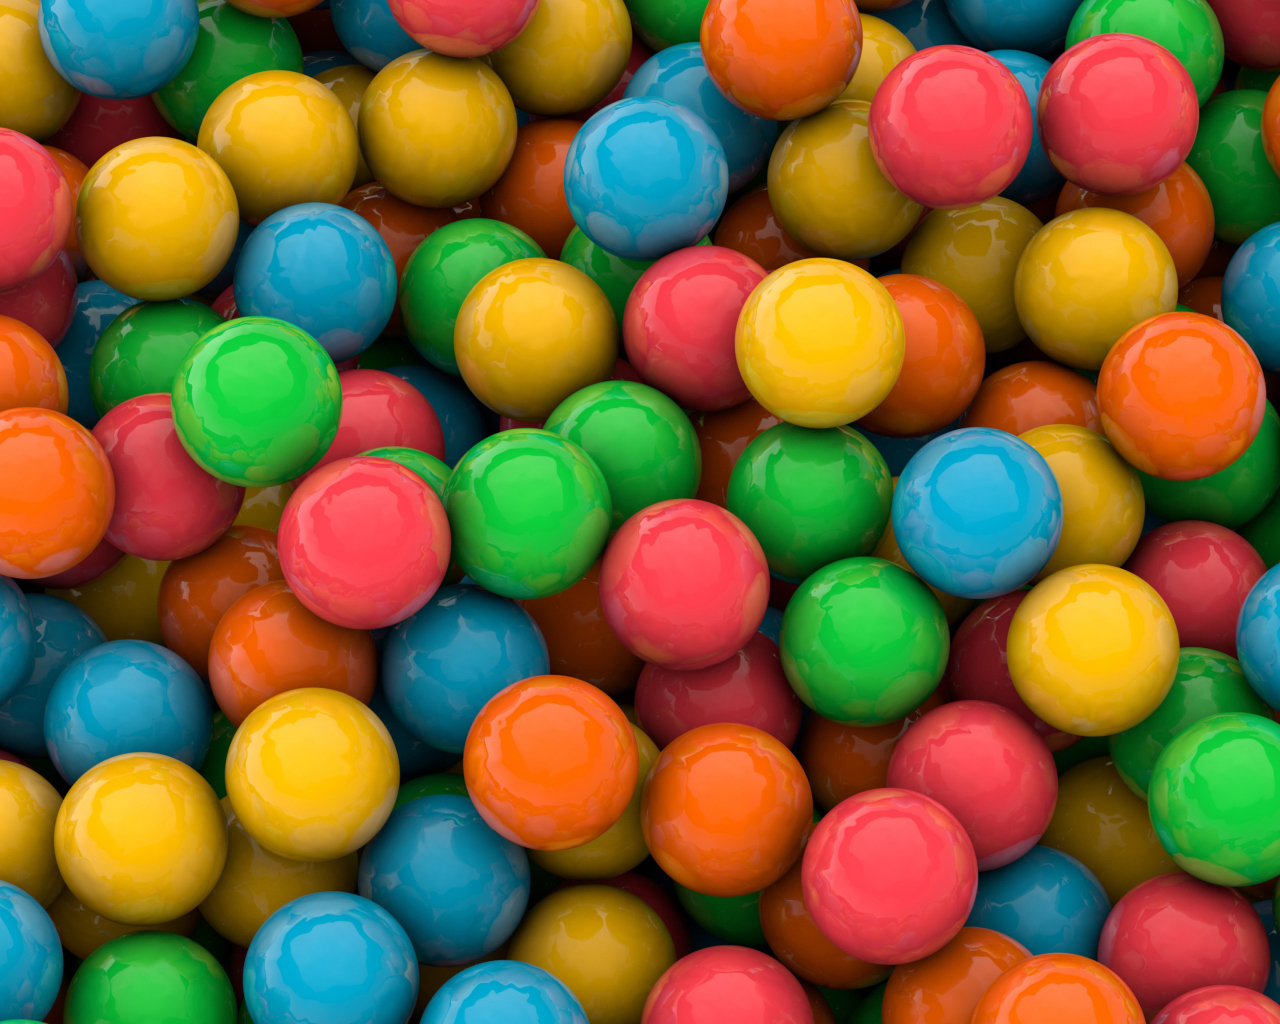 Colorful Candies wallpaper 1280x1024